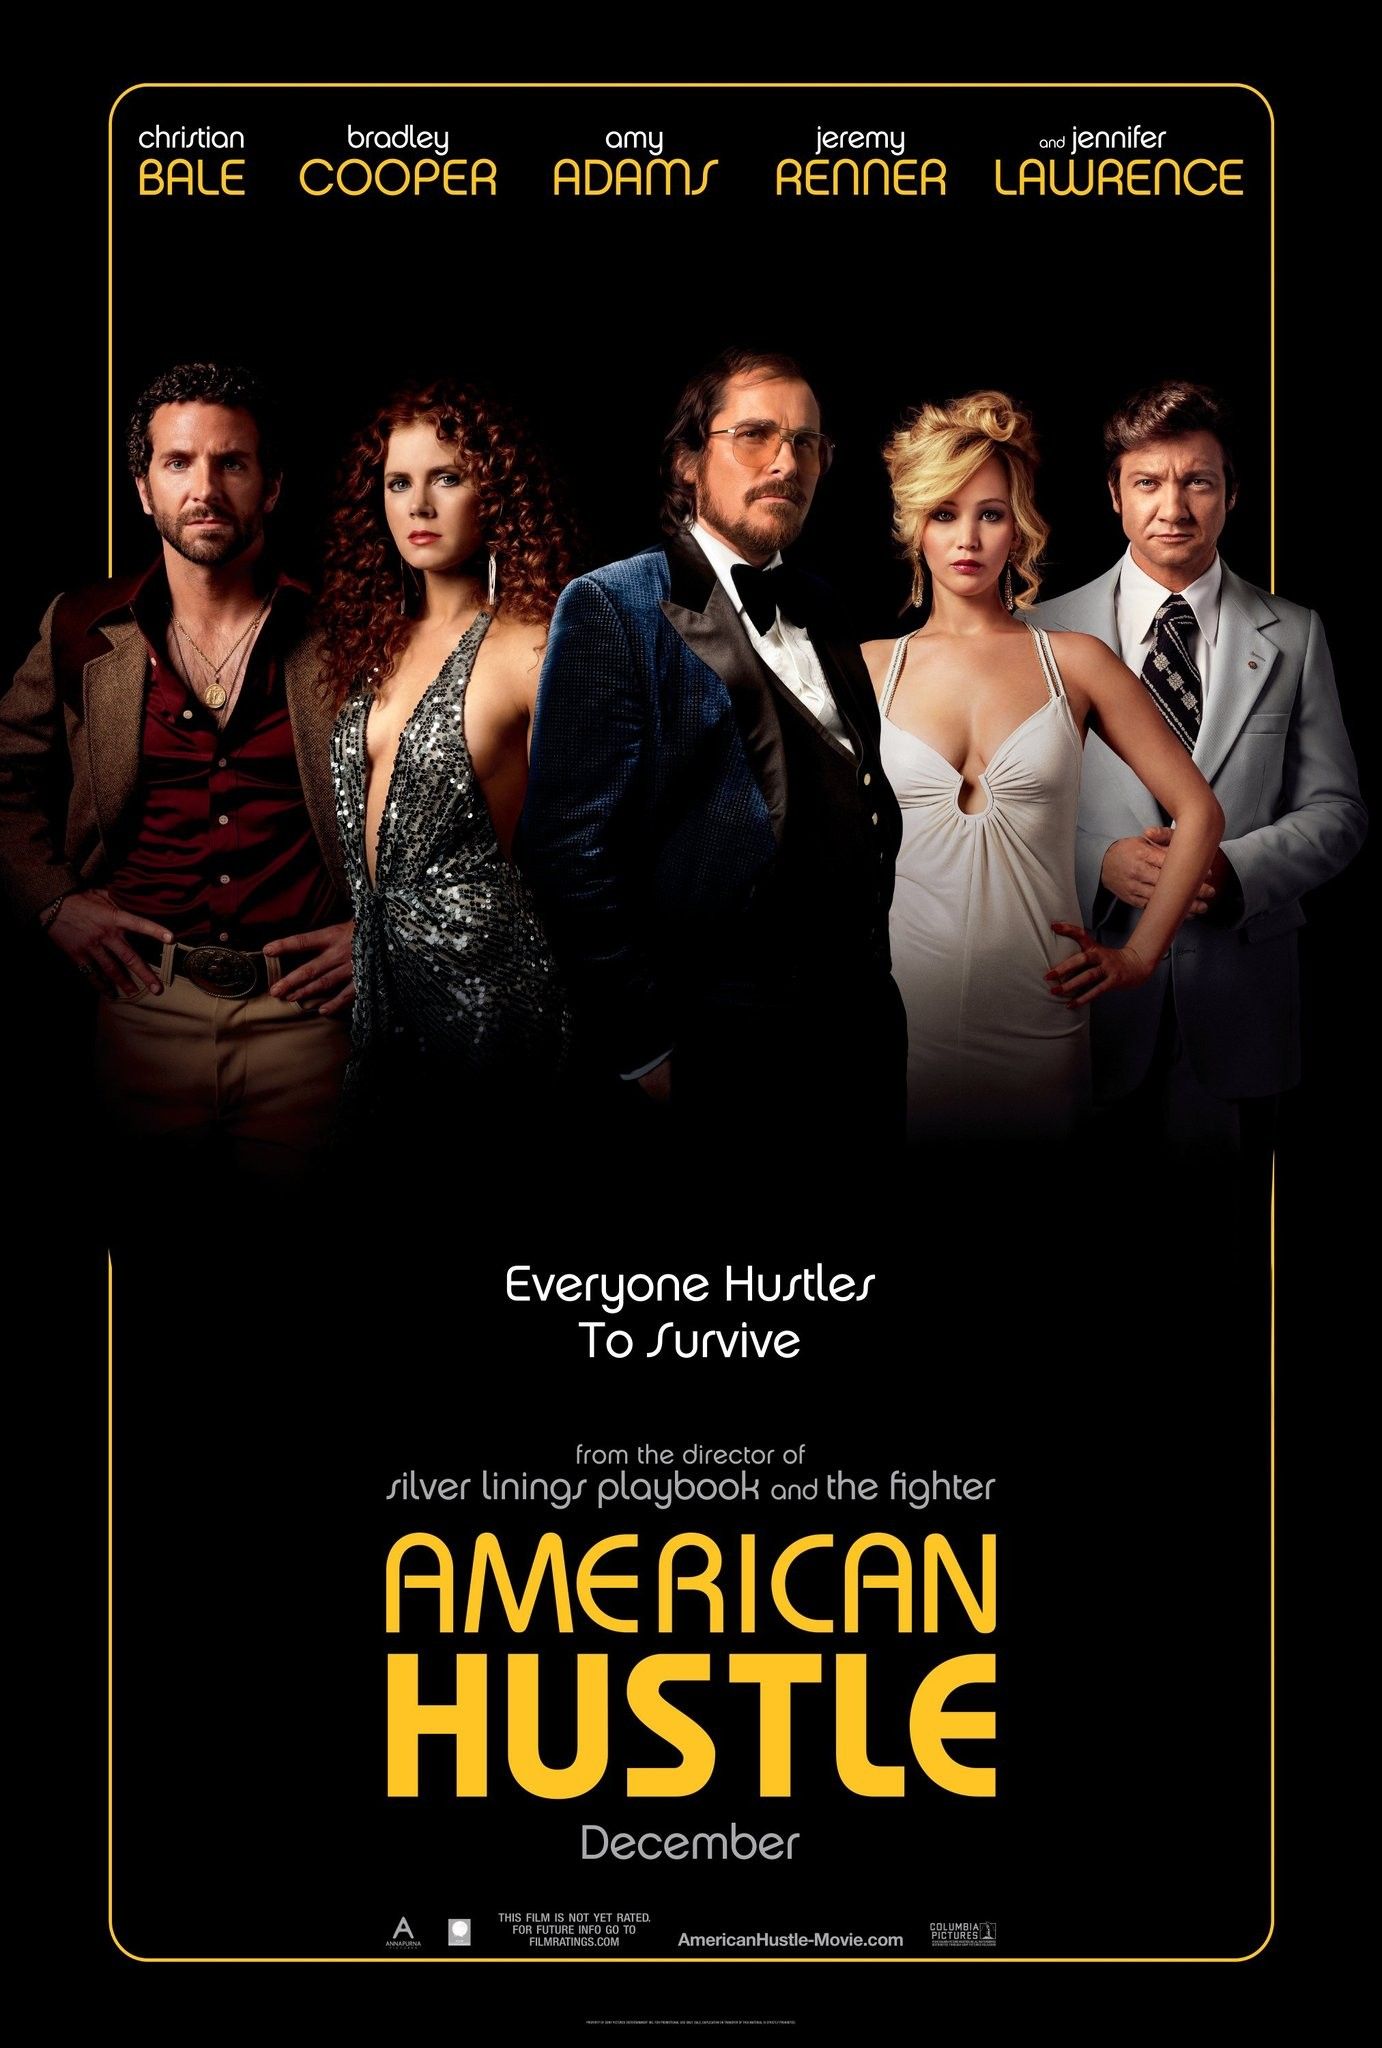 Critics' Choice Award Nominations Led by 12 YEARS A SLAVE and AMERICAN HUSTLE | Collider